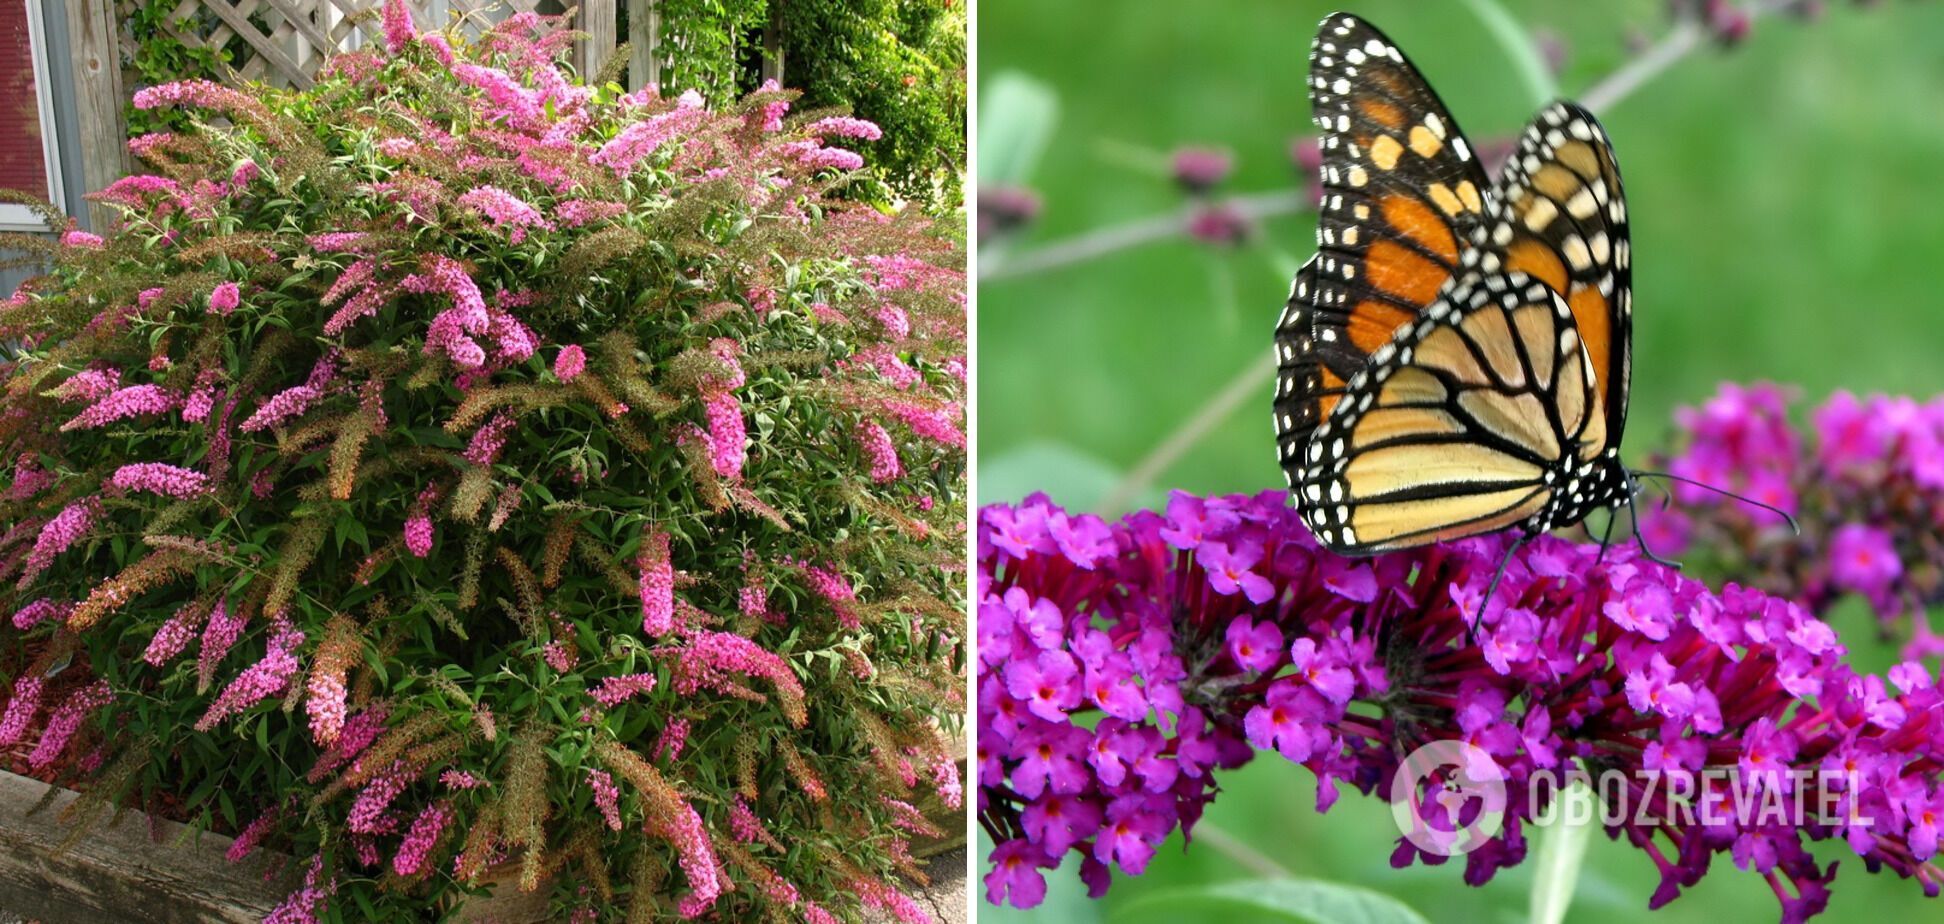 Which plants should not be cut back in summer: you'll only make things worse